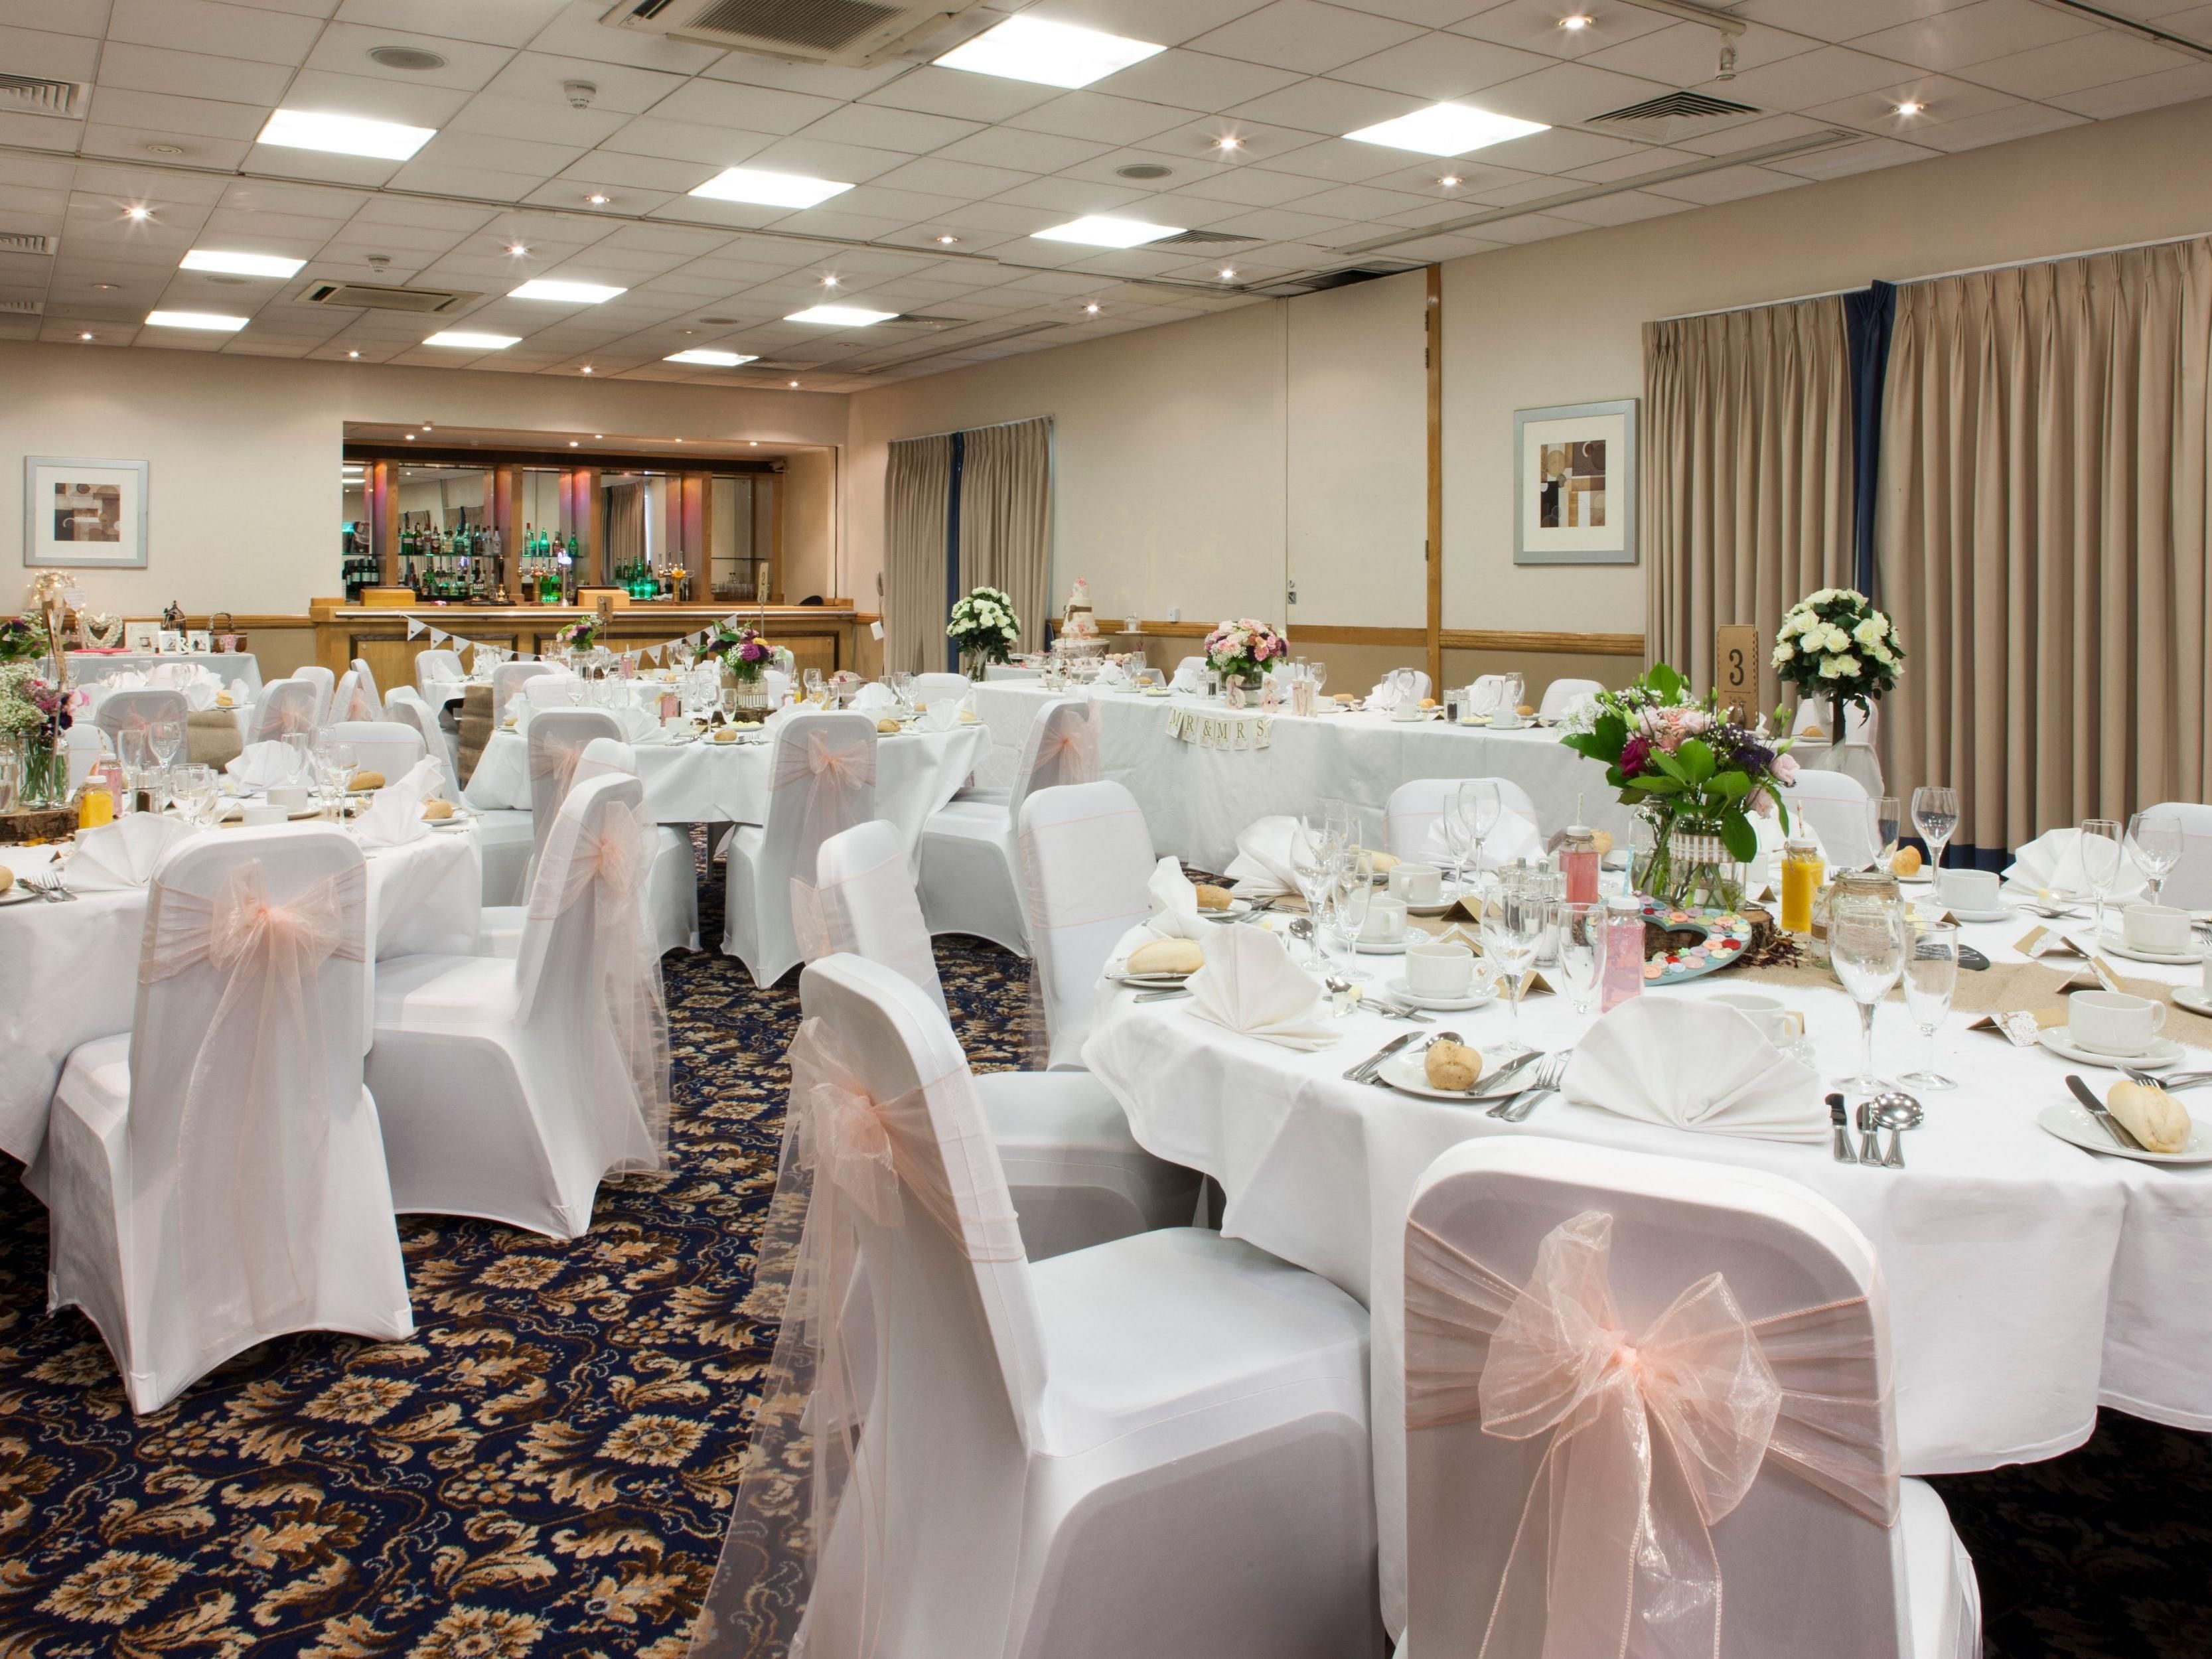 Set in a leafy, rural locale on the outskirts of Wakefield, the Holiday Inn Leeds Wakefield hotel provides the perfect backdrop for your wedding day.